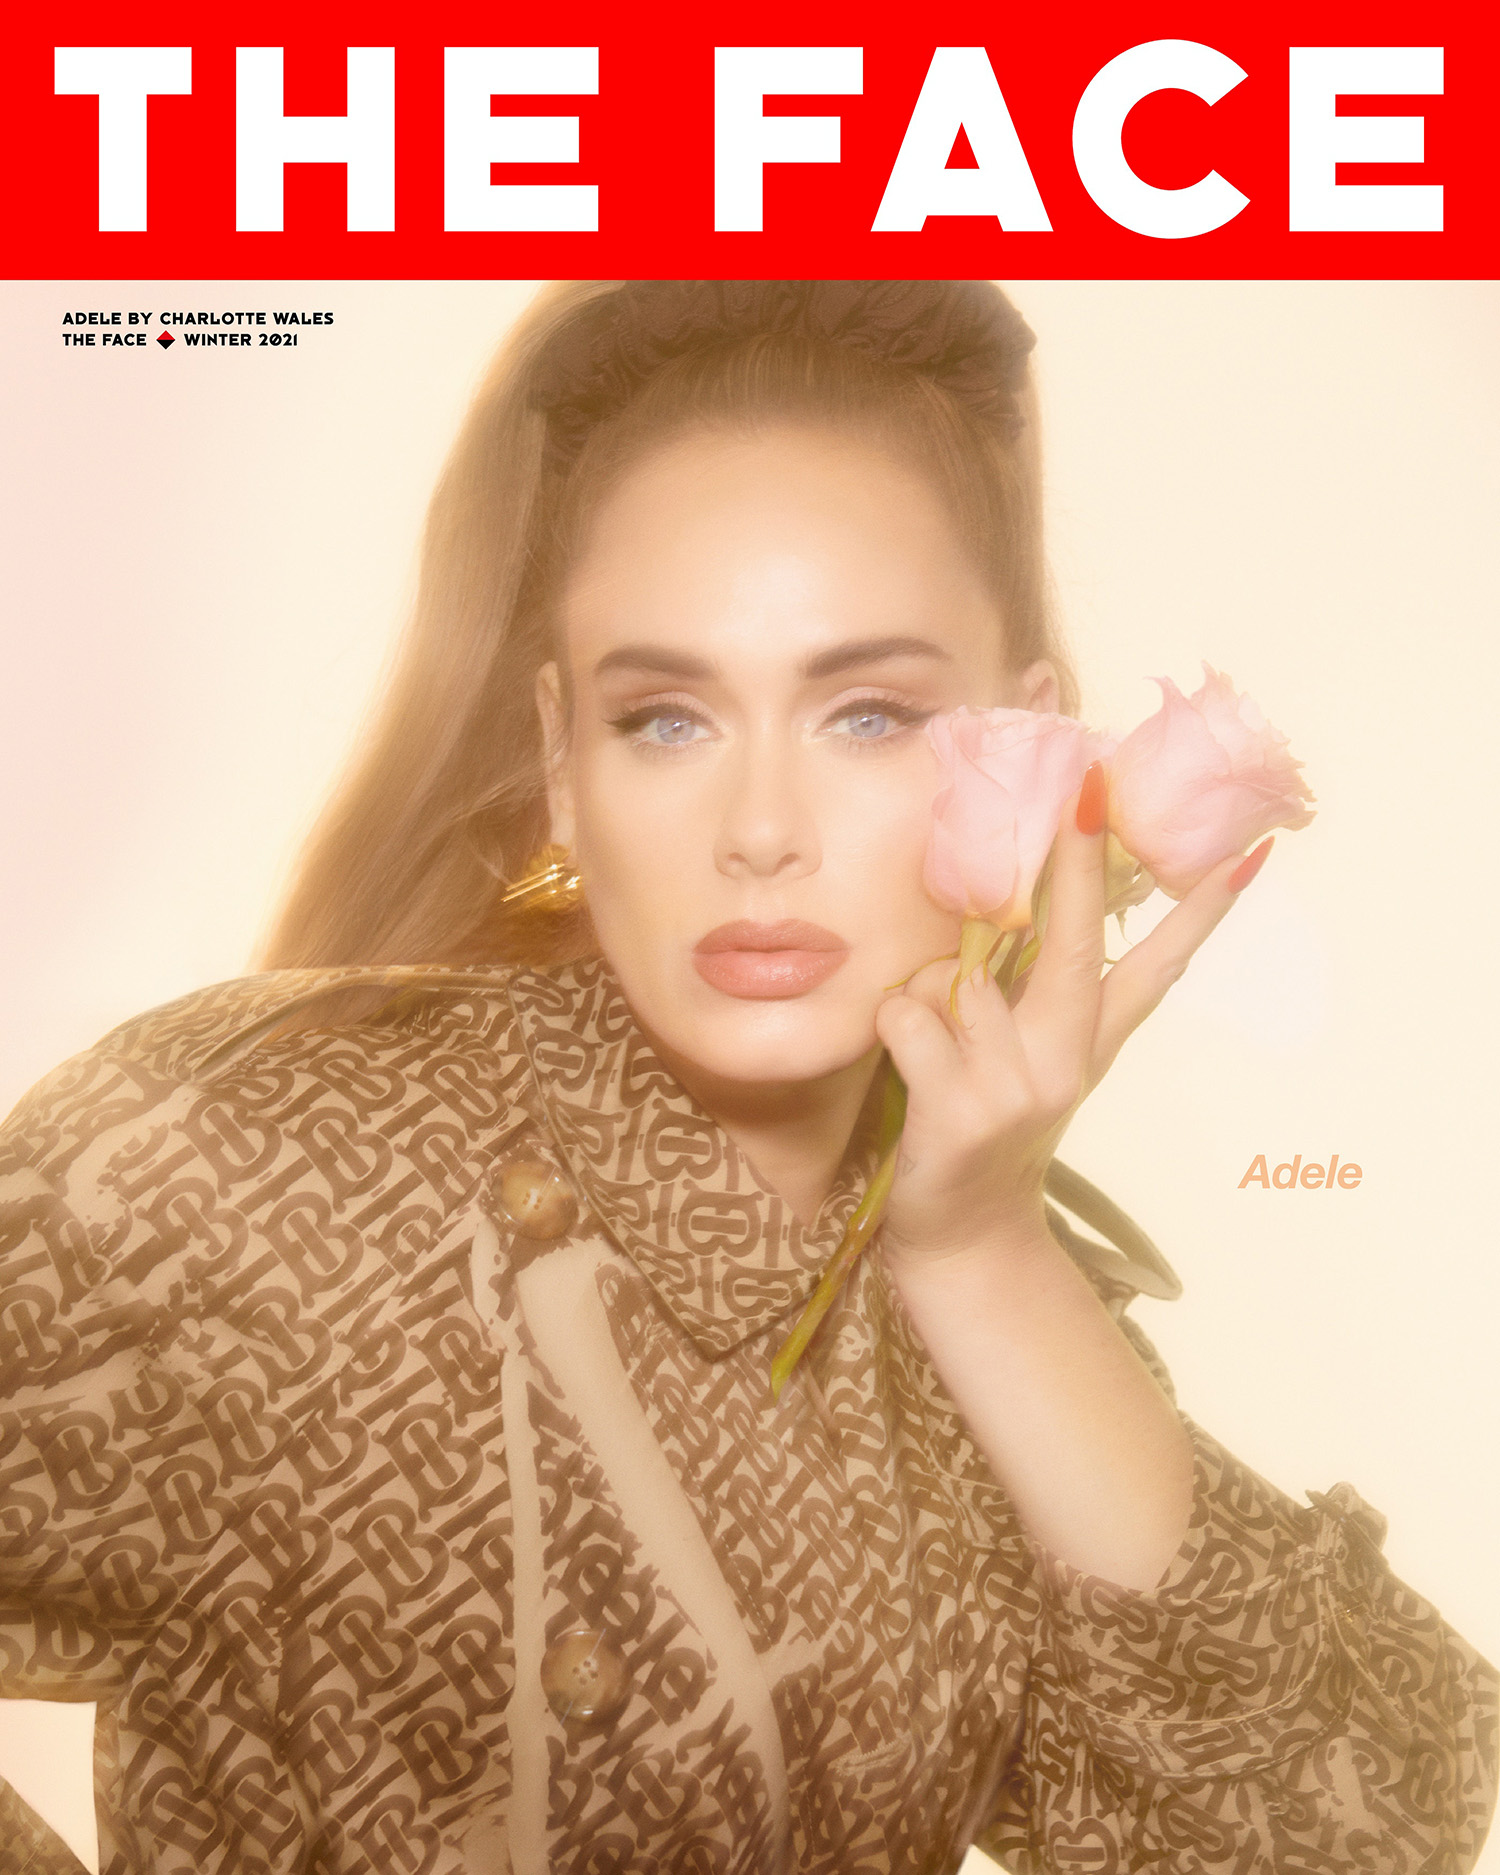 Adele covers The Face Magazine Winter 2021 by Charlotte Wales